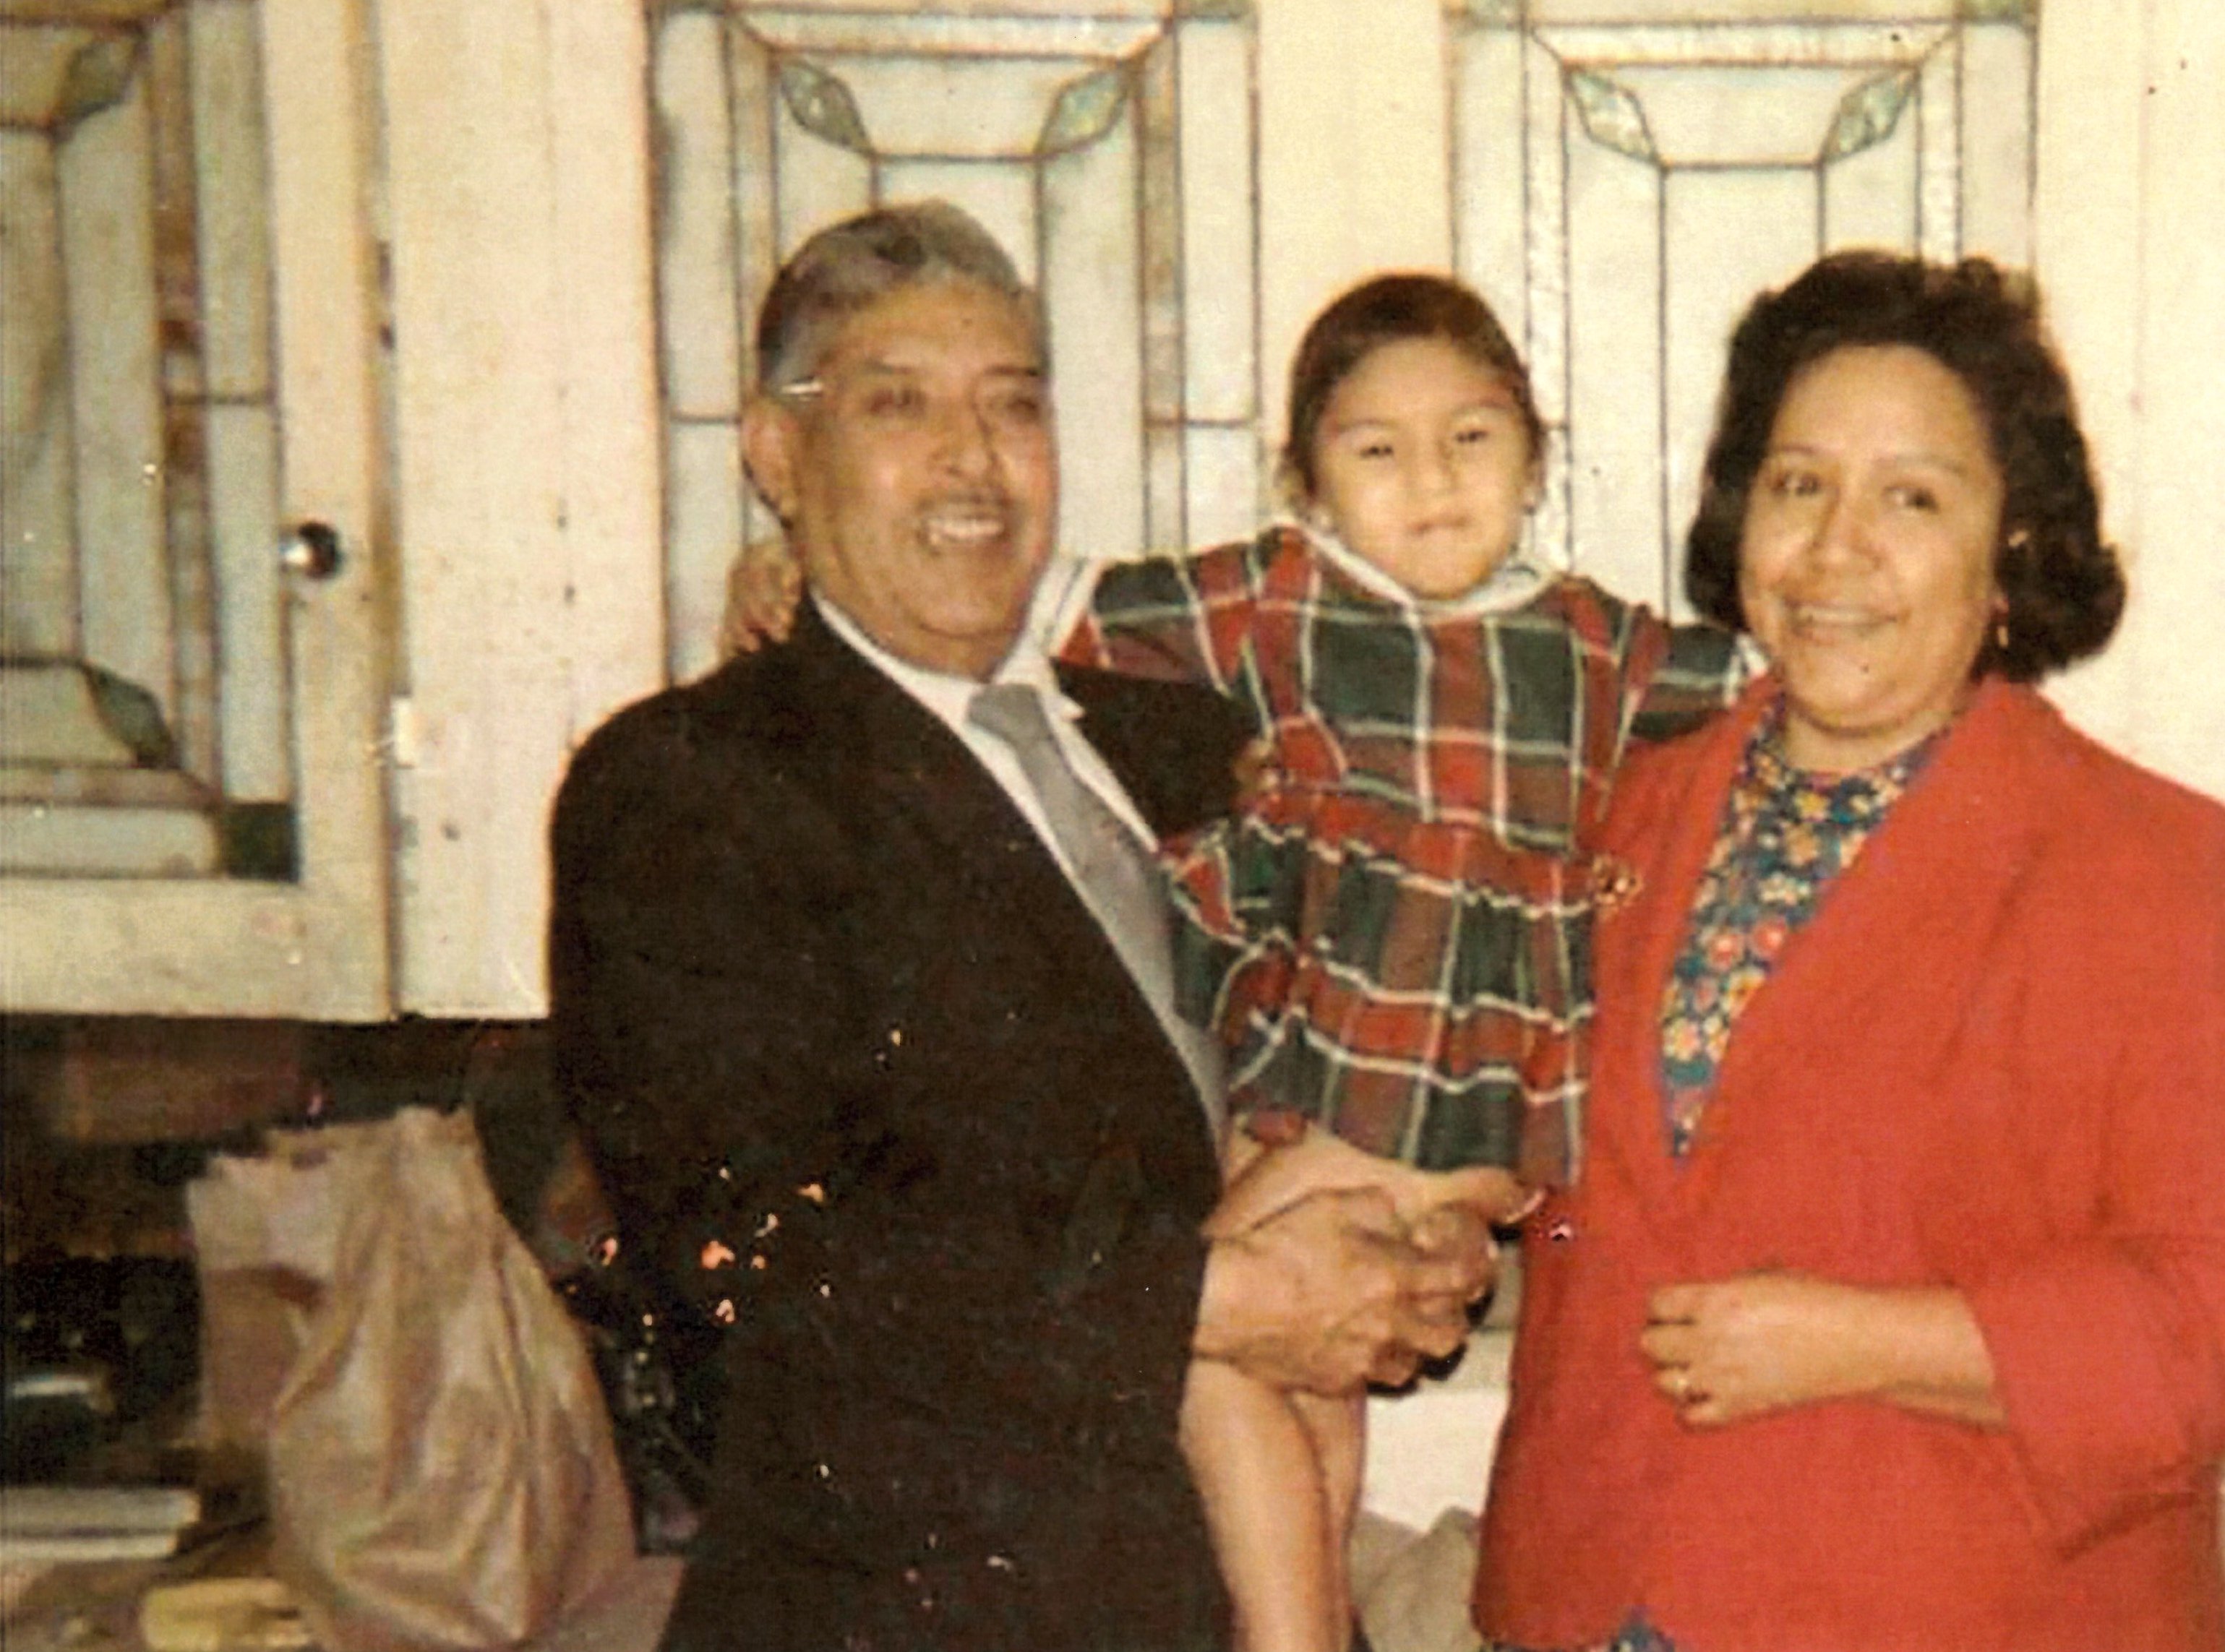 Photo of Marianne Diaz’s (L-R) Dad, cousin Angel, and Mom. Angel, being the closest cousin in a family of 9 kids, had Marianne Diaz’s parents as godparents.